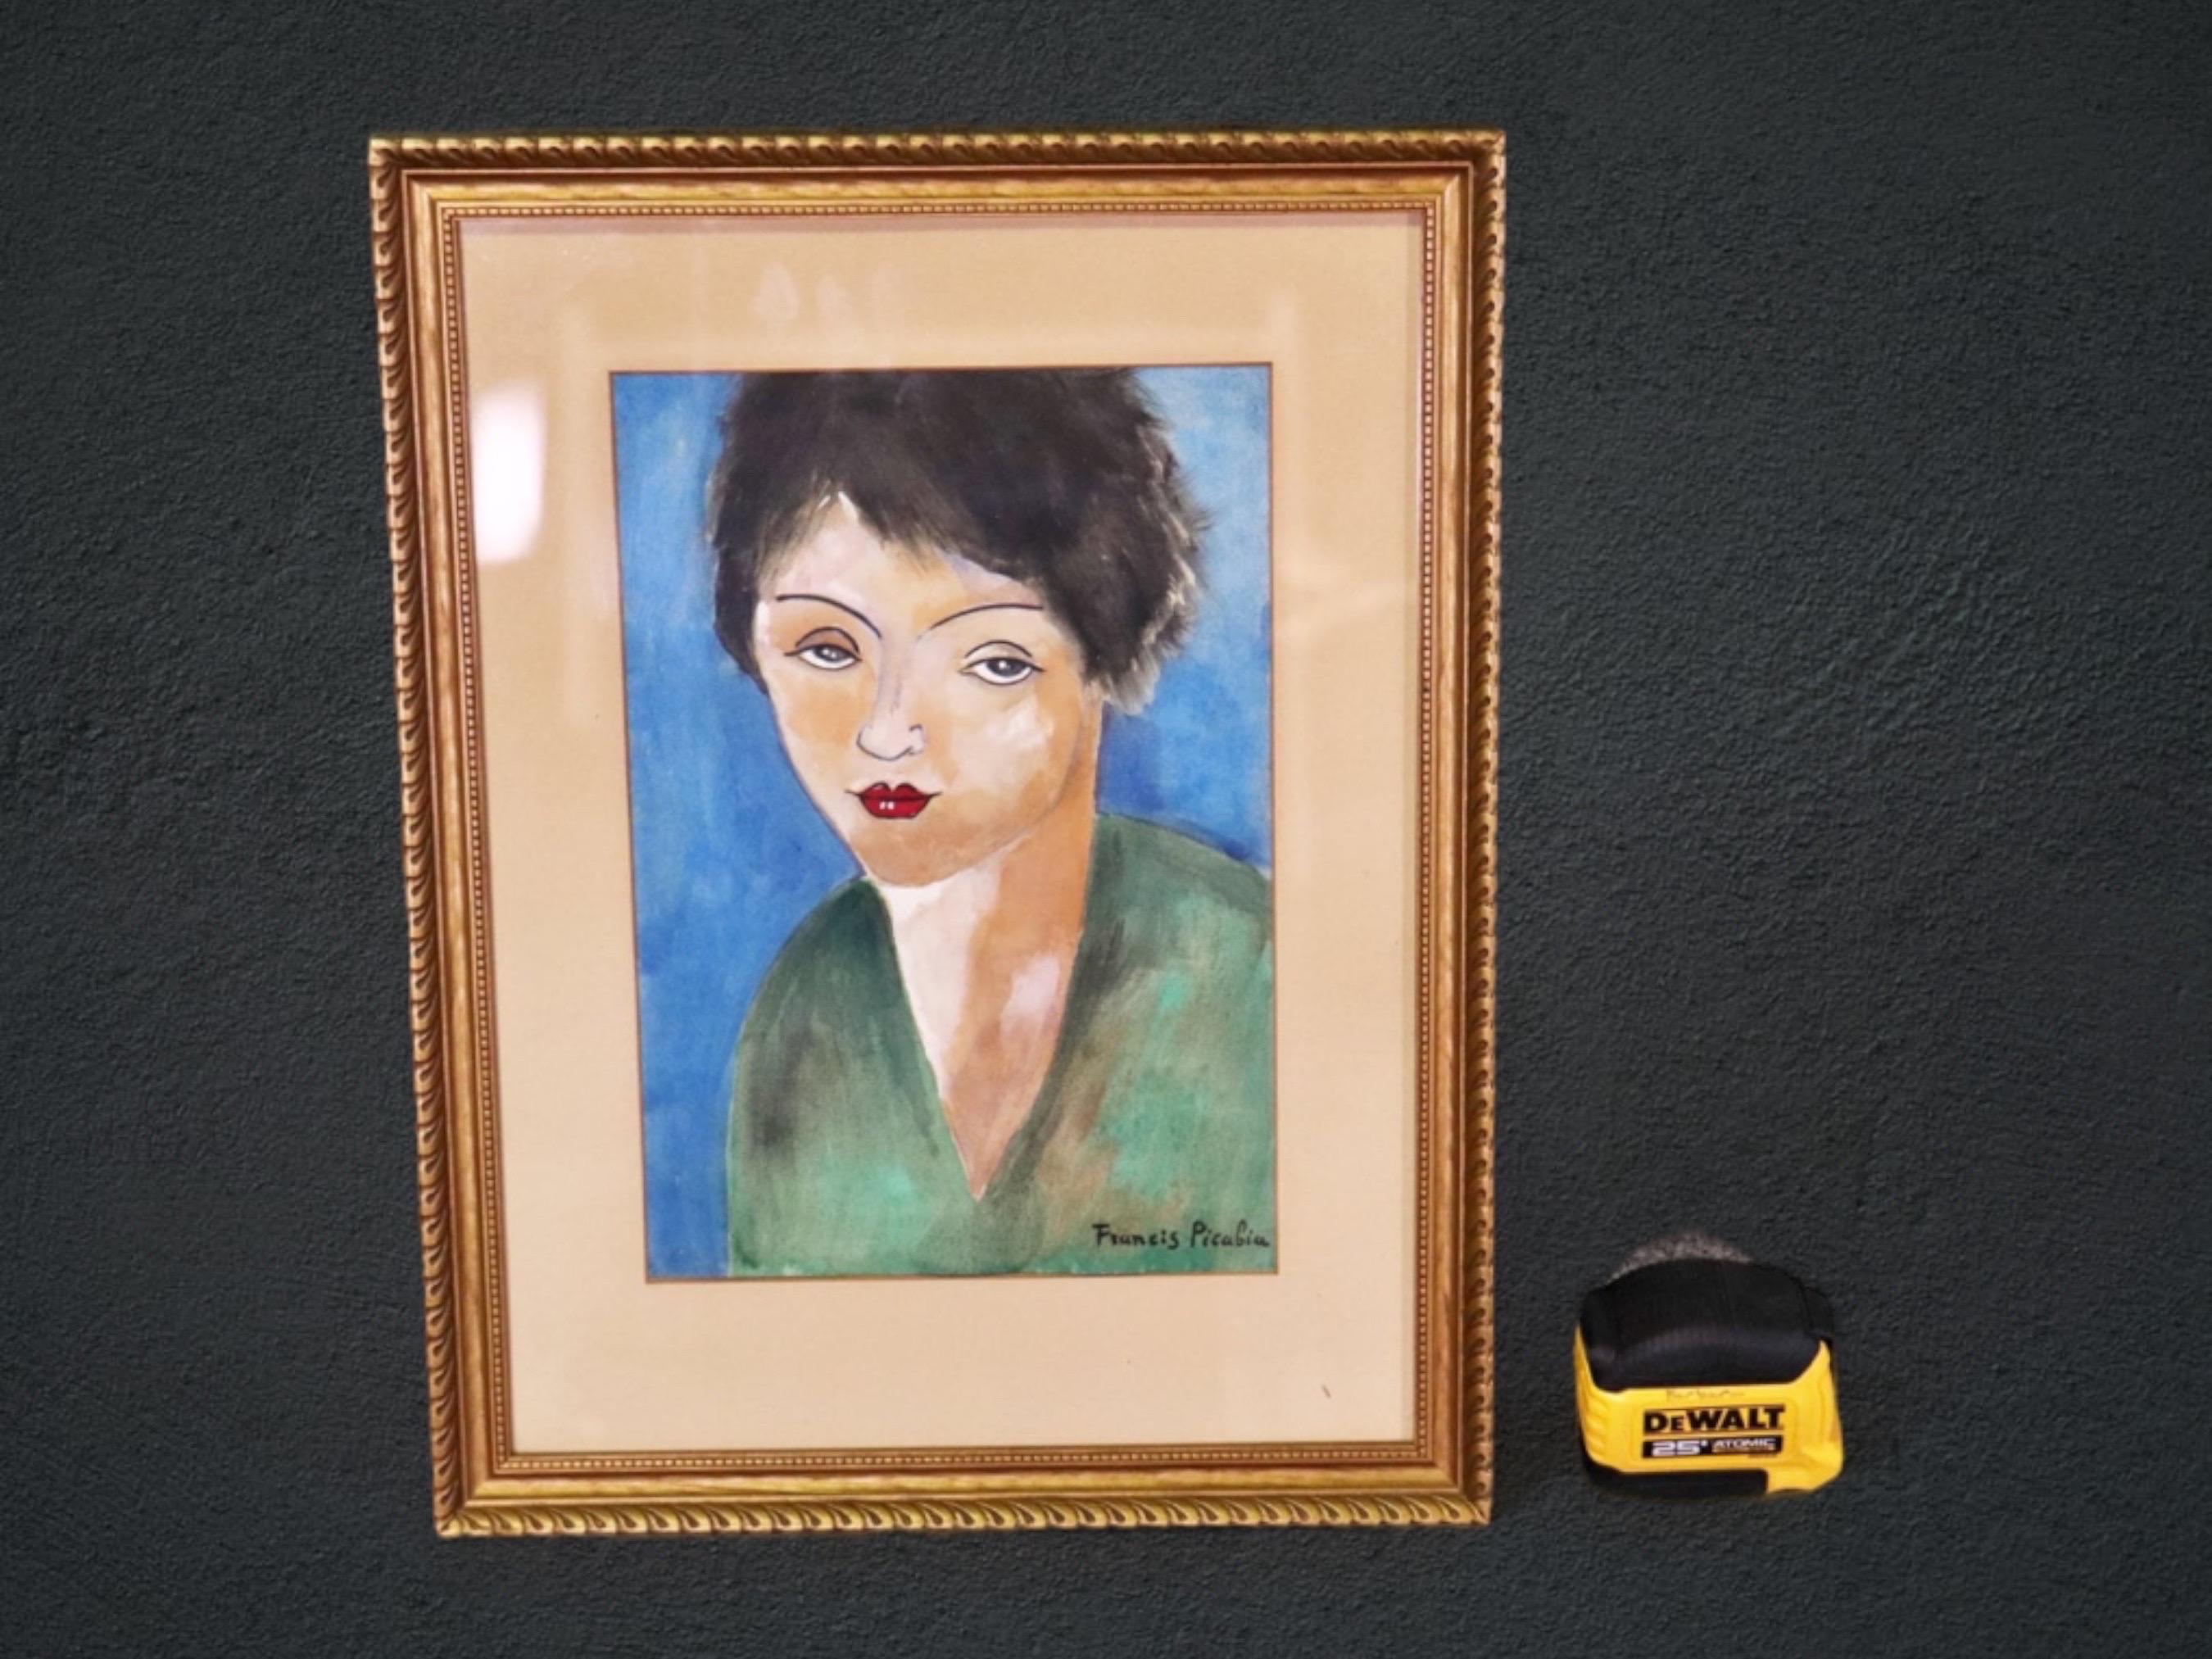 Dimensions Framed: H: 17 1/2in W: 13 1/2 D: 3/4in

This framed Francis Picabia (1879 - 1953) portrait of a woman is perfect for you and your home! Francis Picabia was a French avant-garde painter, poet and typographist. After experimenting with